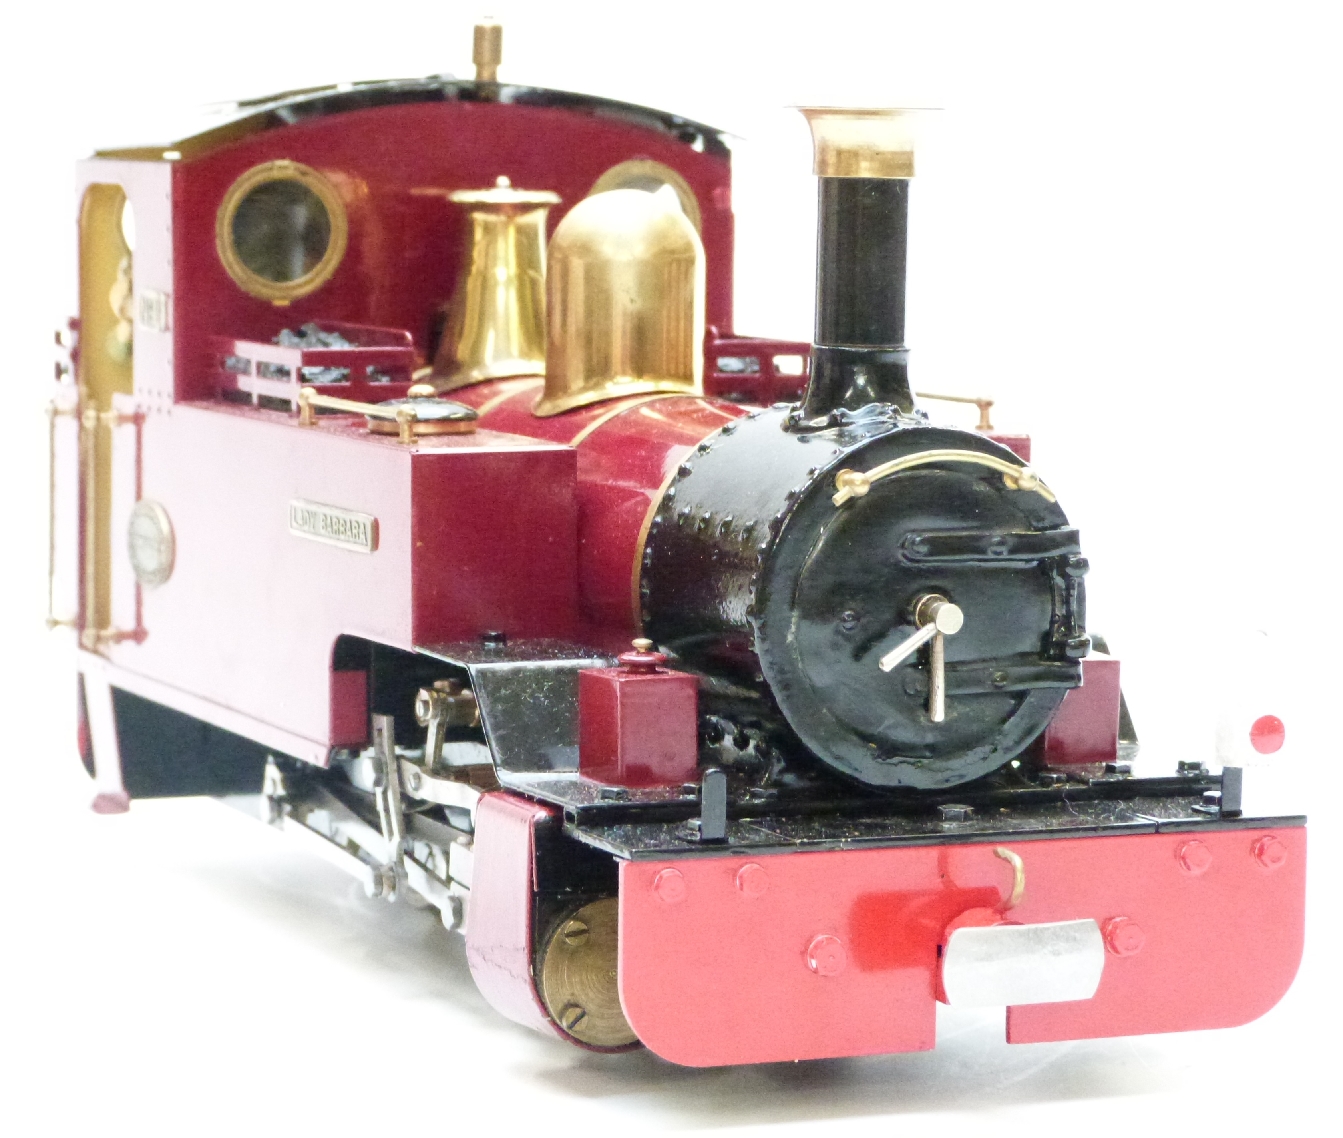 Roundhouse Lady Anne 32mm gauge 0-6-0 live steam garden railway locomotive and tender 'Lady Barbara' - Image 5 of 8